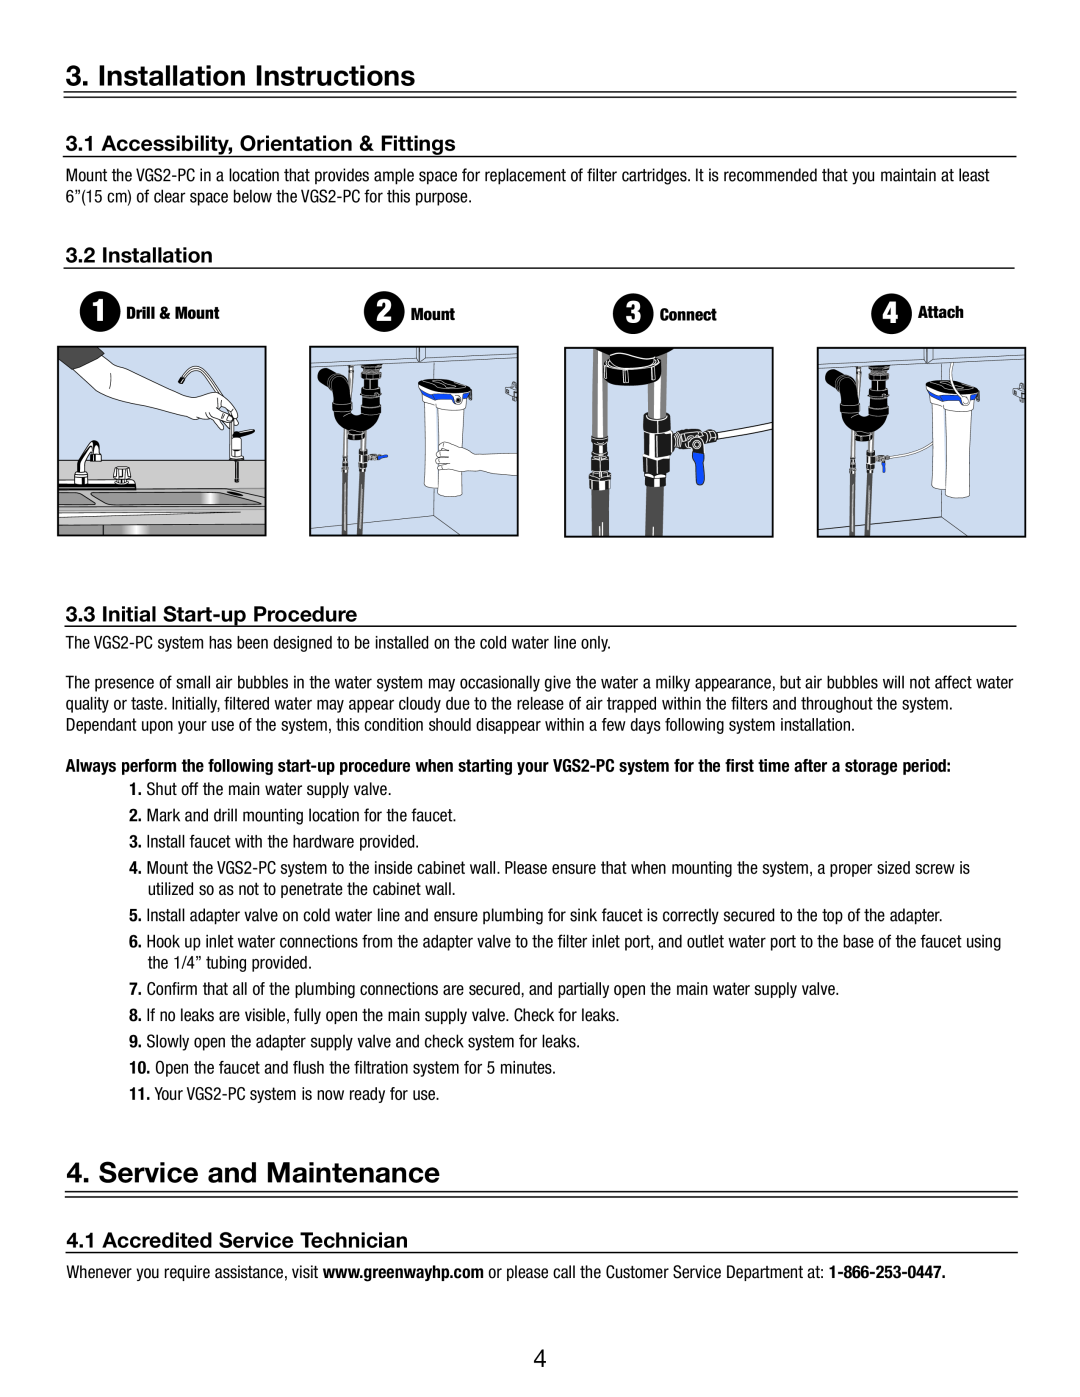 Greenway Home Products VGS2-PC Installation Instructions, Service and Maintenance, Accessibility, Orientation & Fittings 